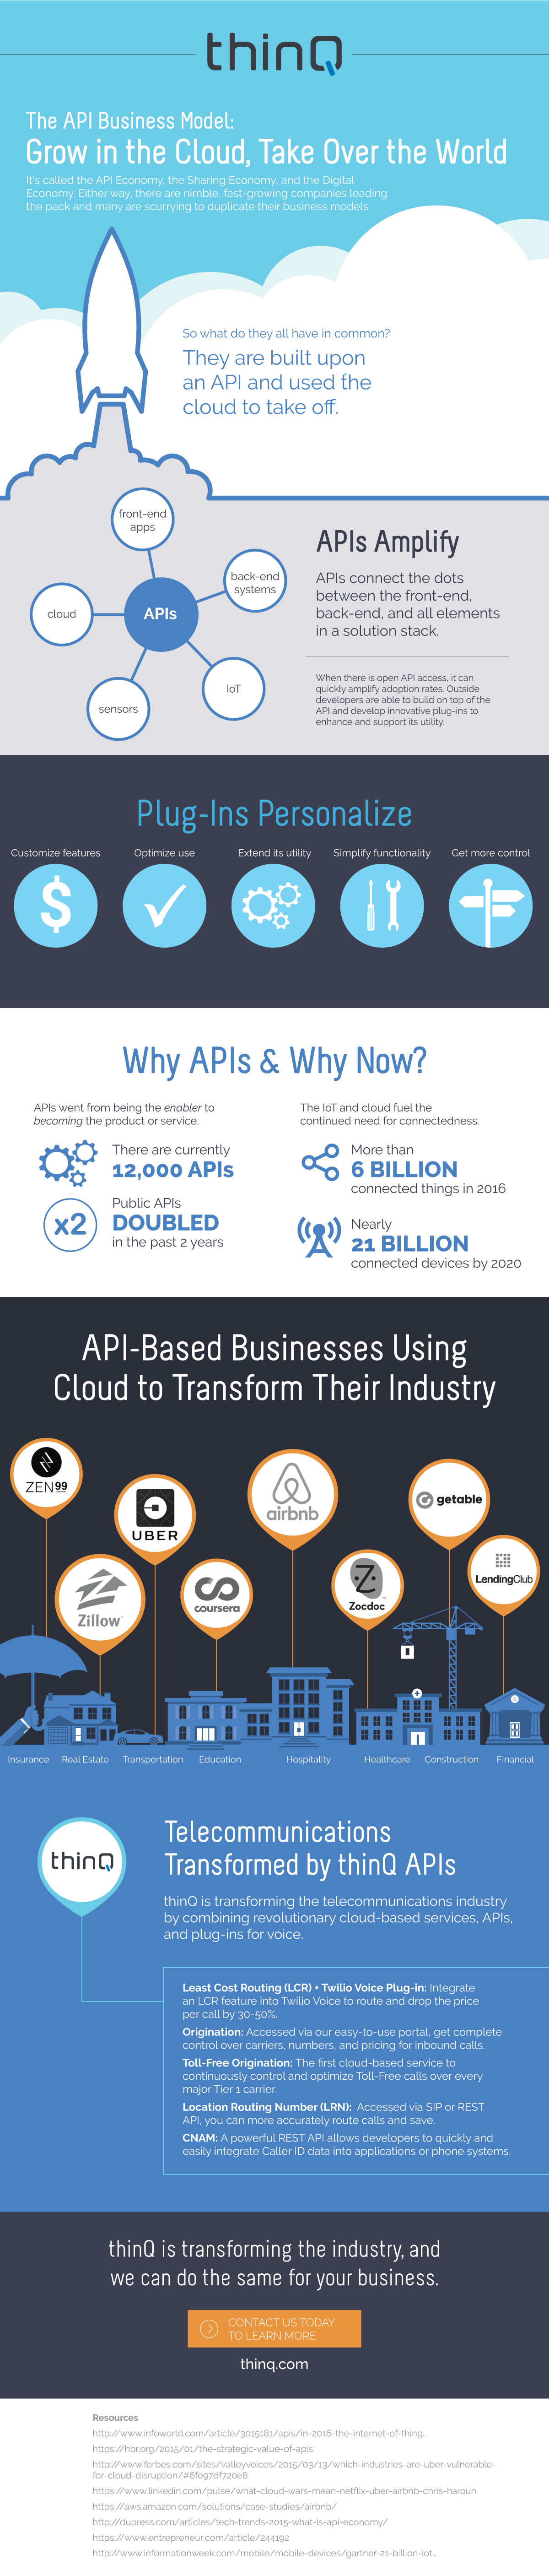 The API business model can mean significant growth for those who can take advantage.